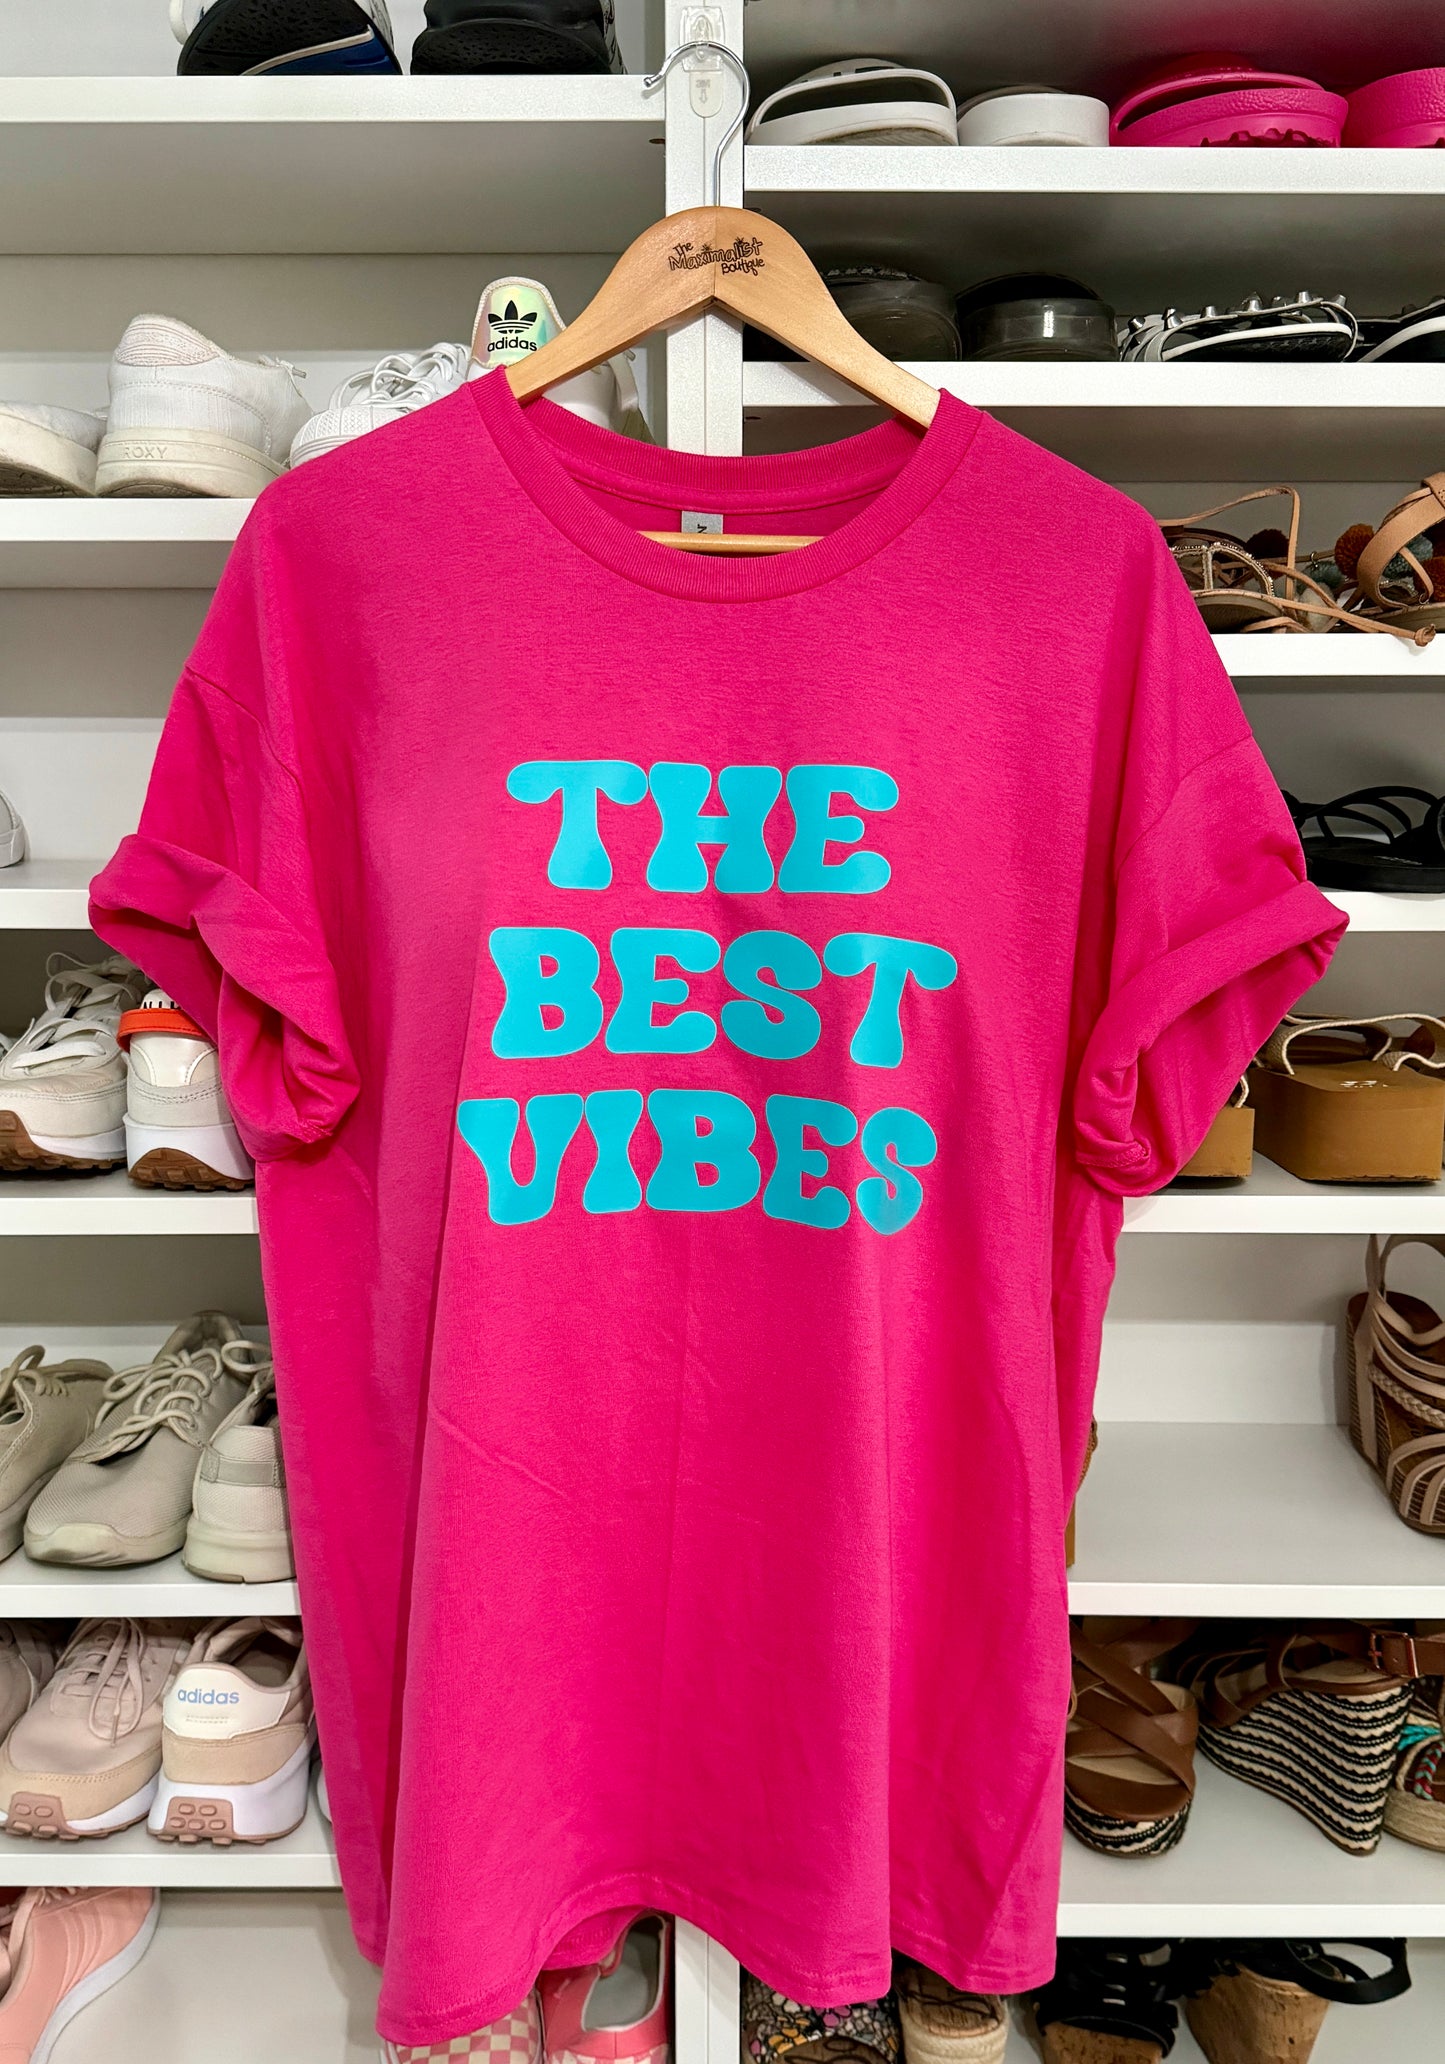 The Best Vibes T-Shirt